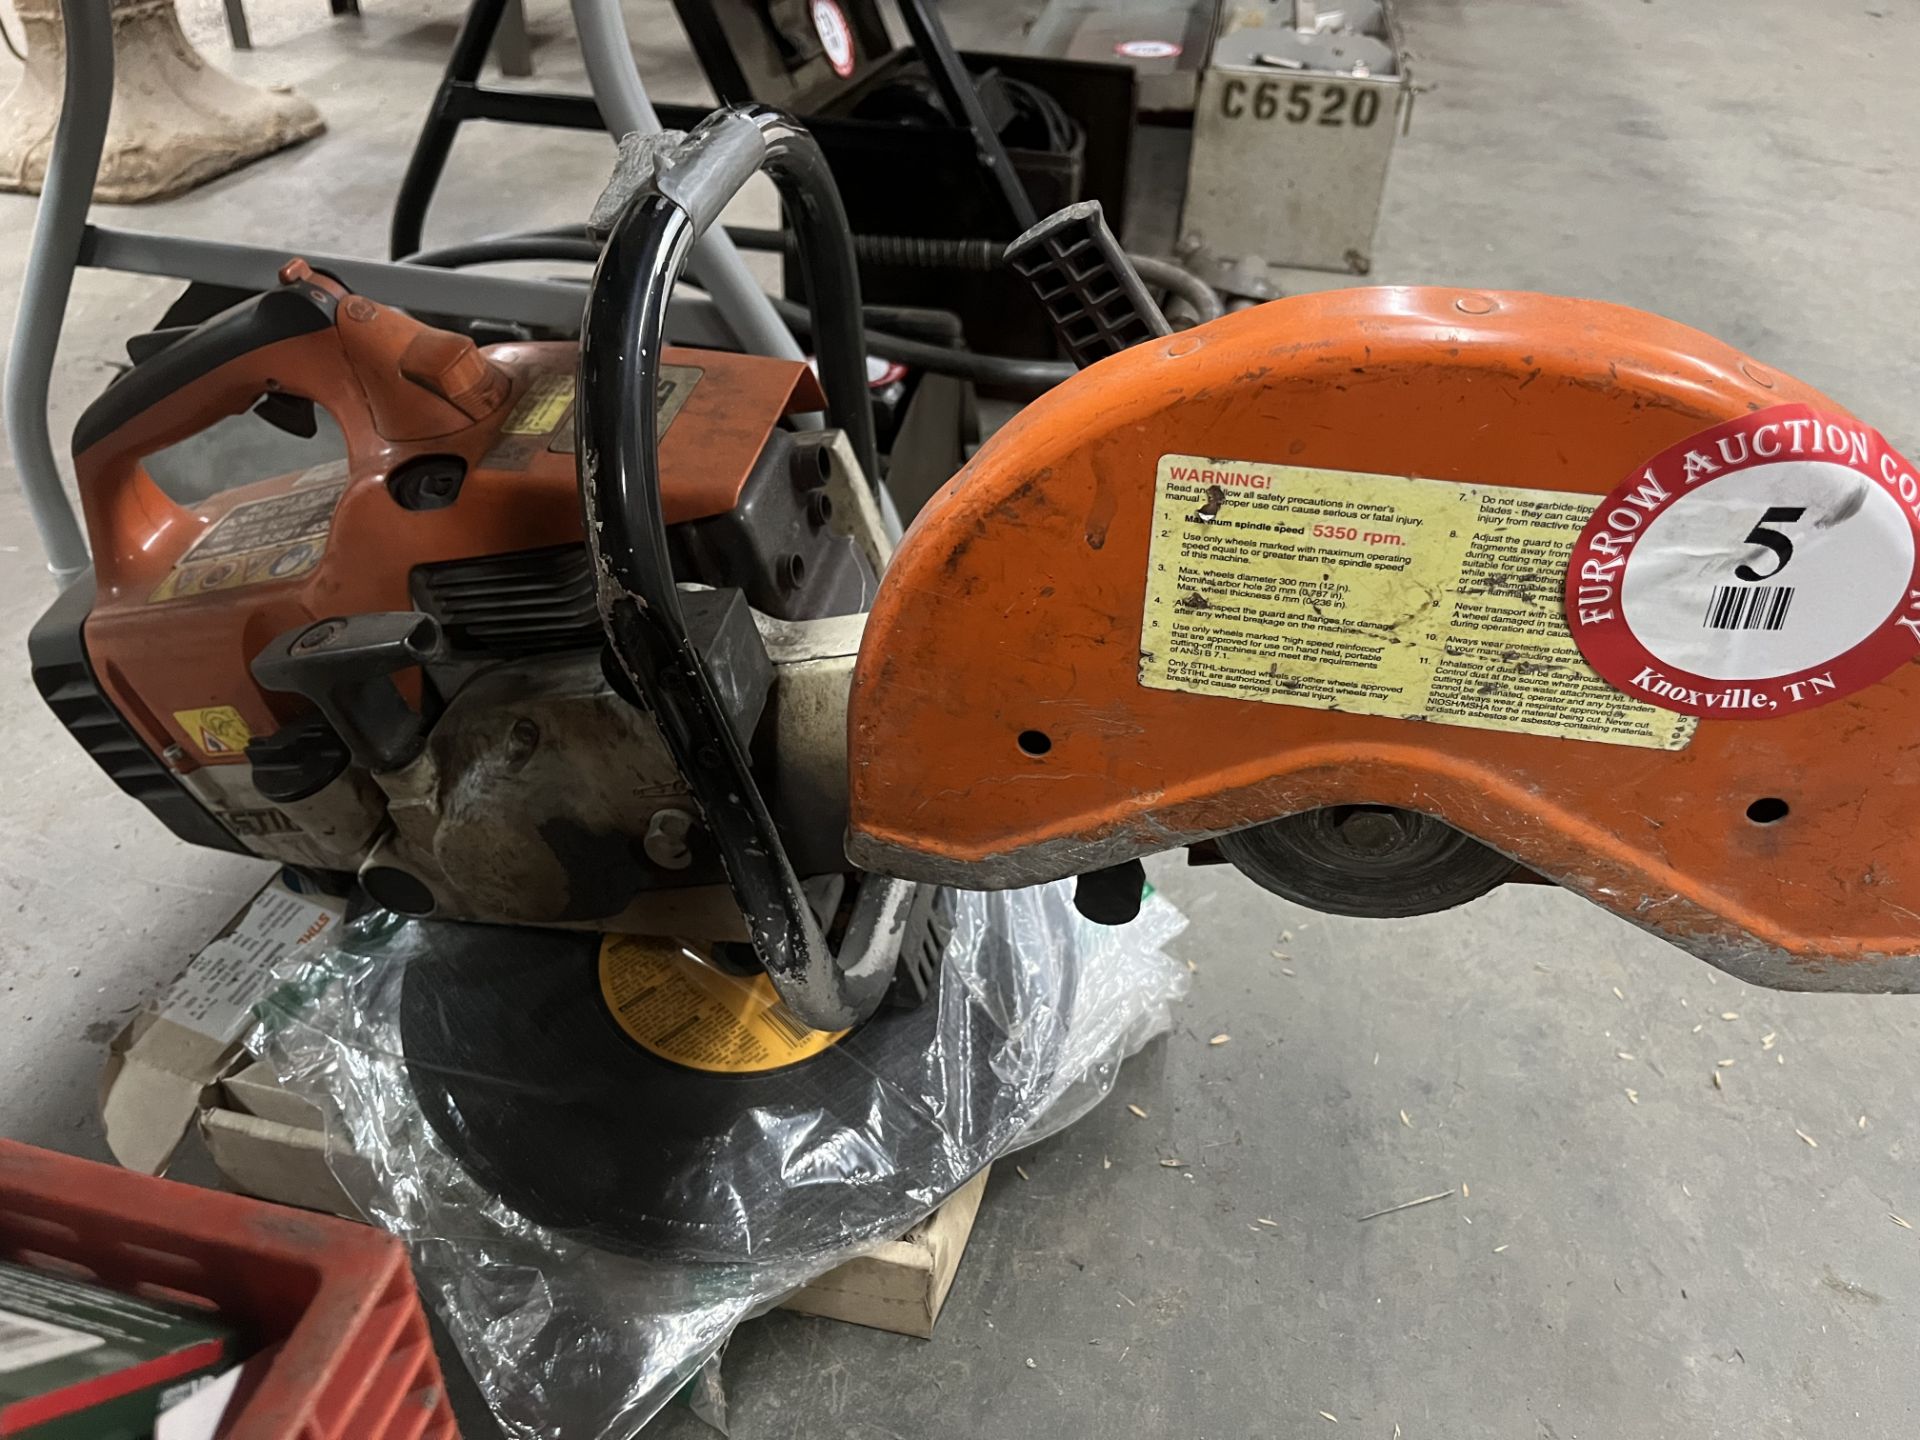 Stihl TS400 Abrasive Concrete Saw with Extra Blades - Image 2 of 4